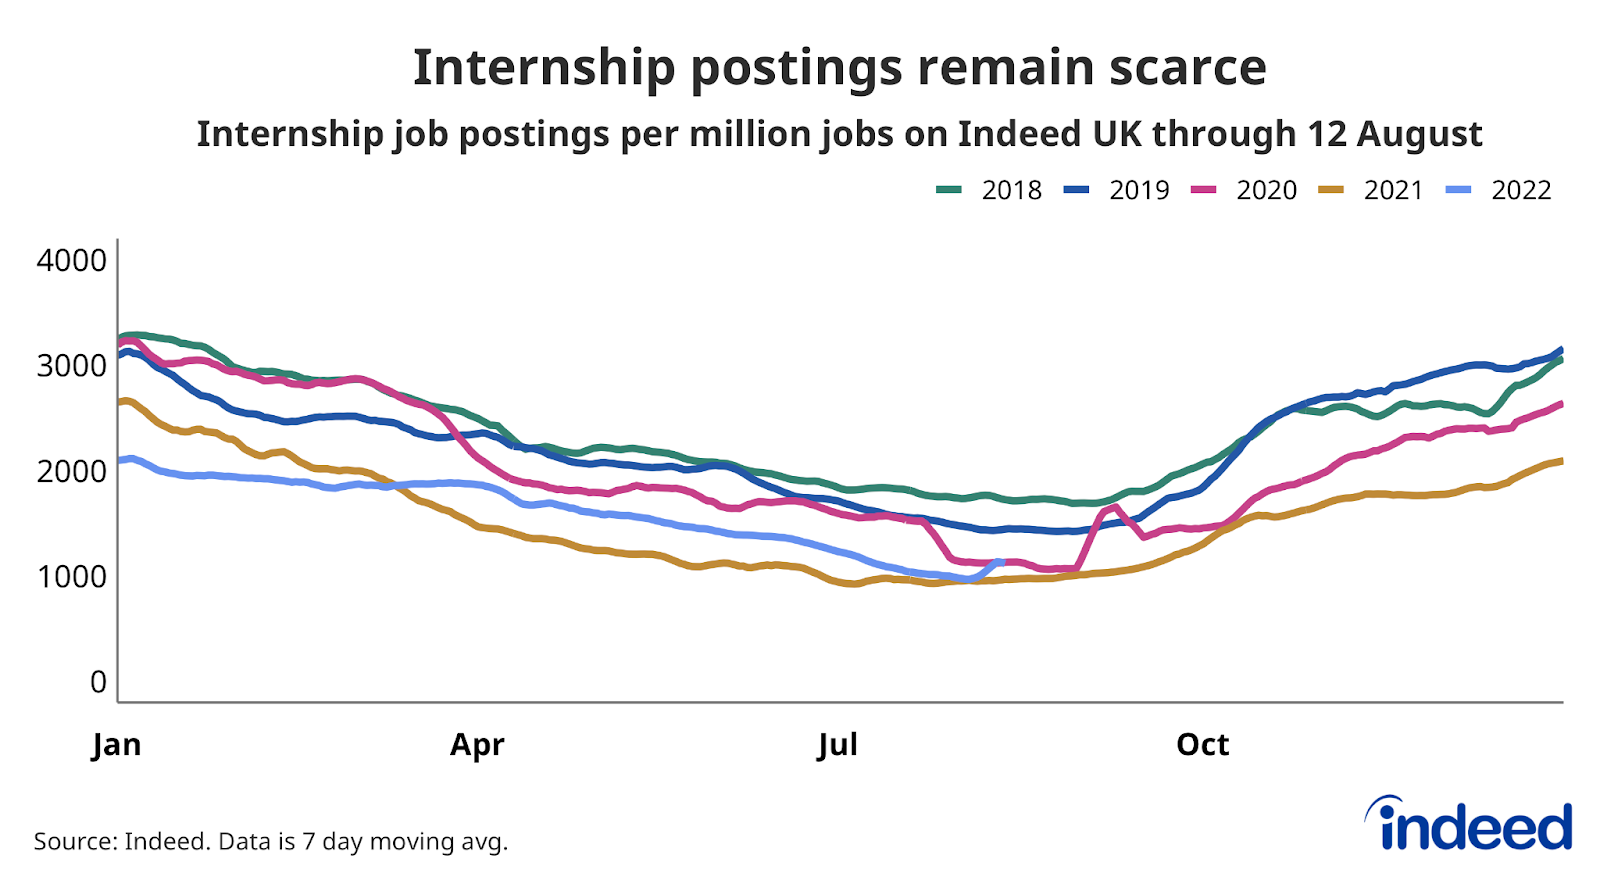 A line chart titled “Internship postings remain scarce” showing the trend in internship job postings per million over the past five years.